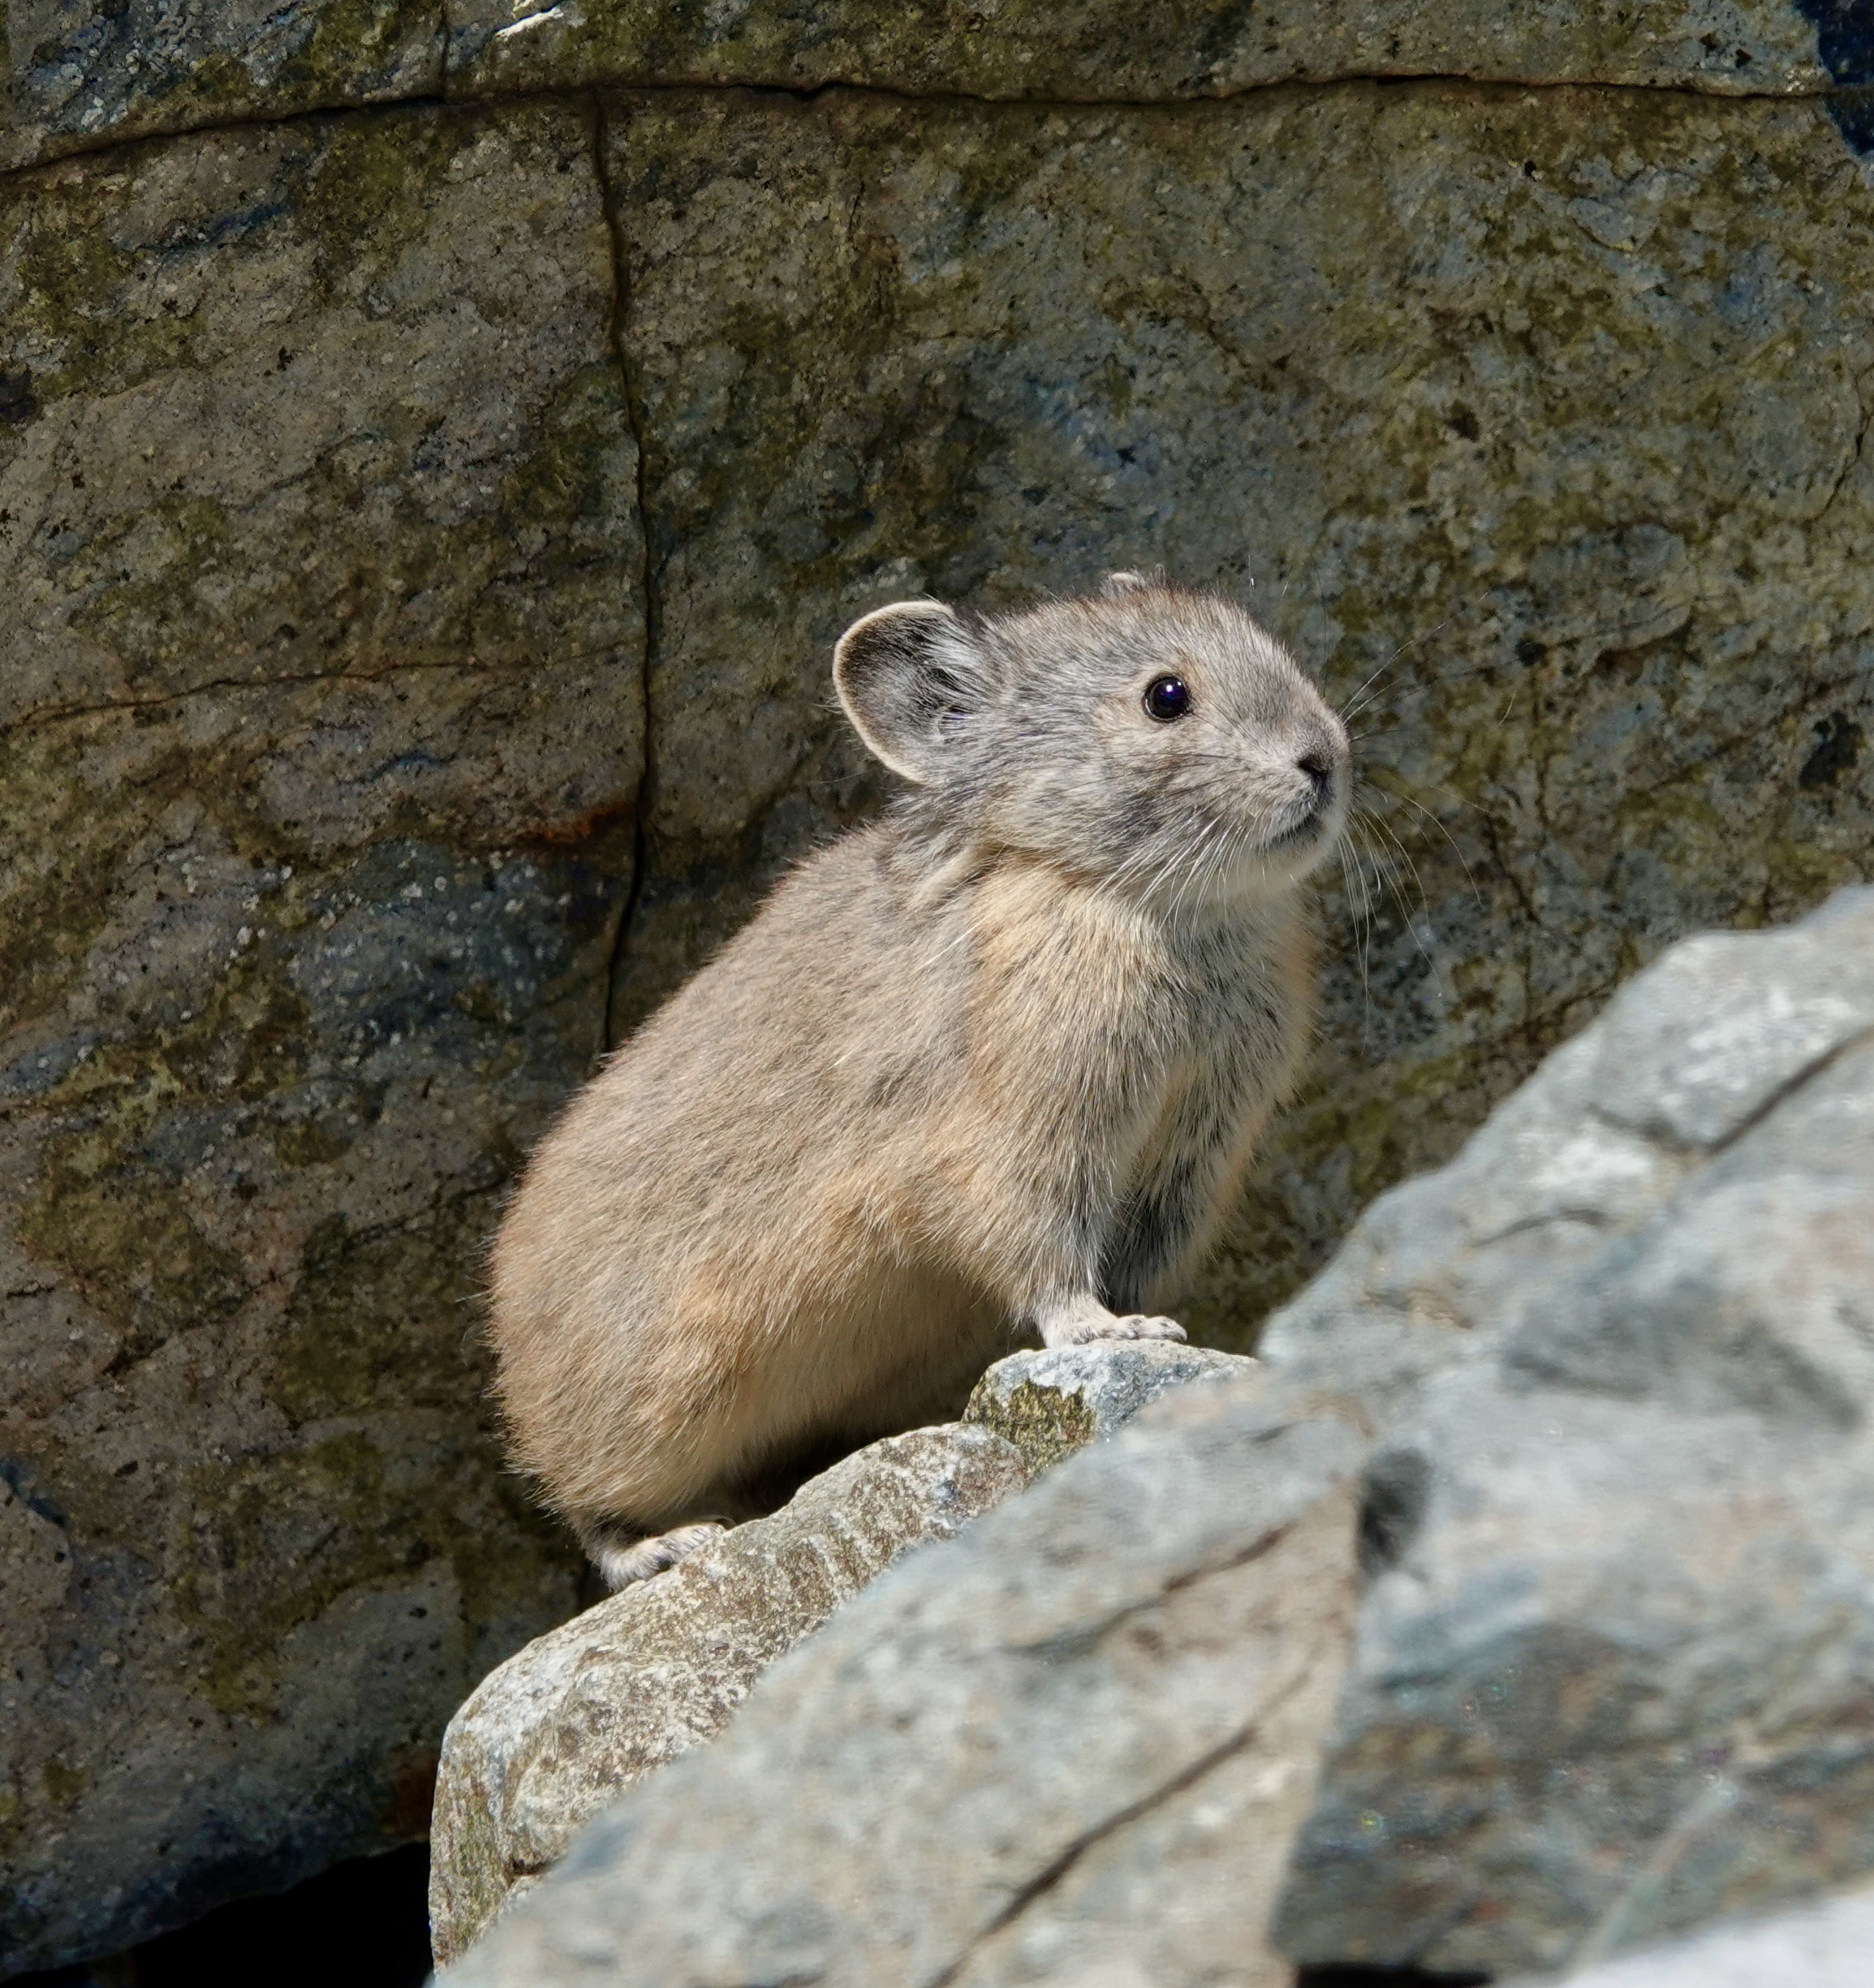 American pikas show resiliency in the face of global warming - ASU Now